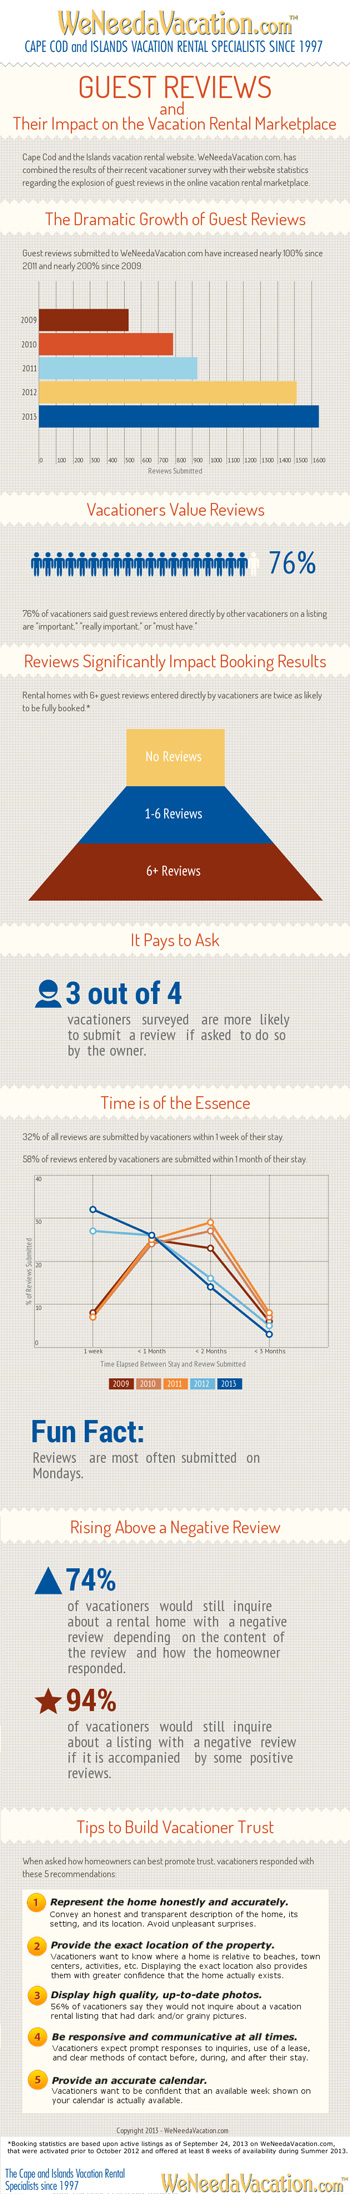 Vacation Rental Guest Reviews infographic